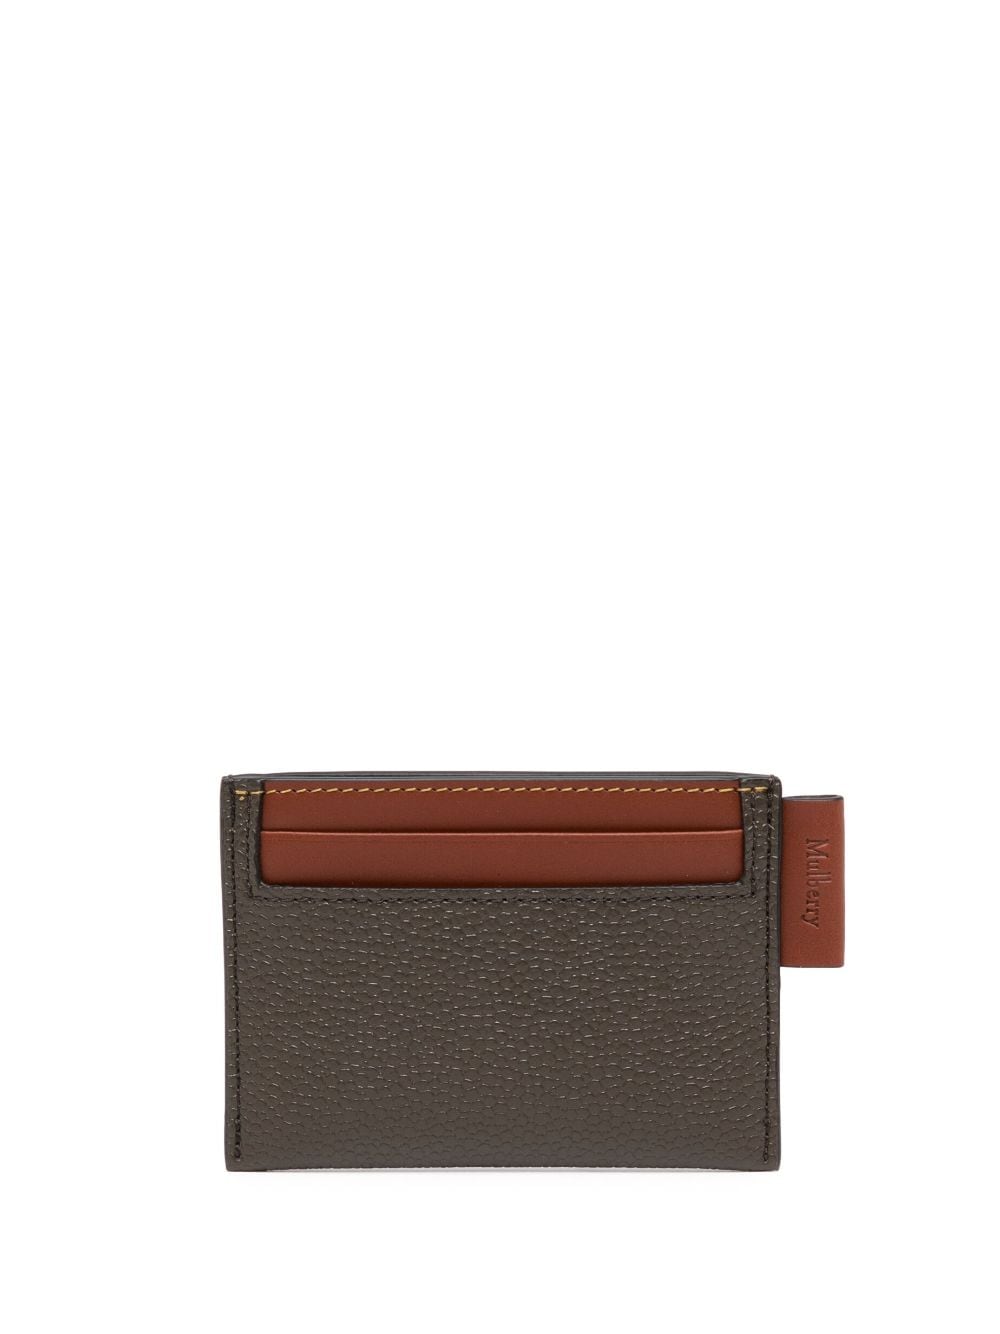 Mulberry logo-tag leather cardholder - Brown